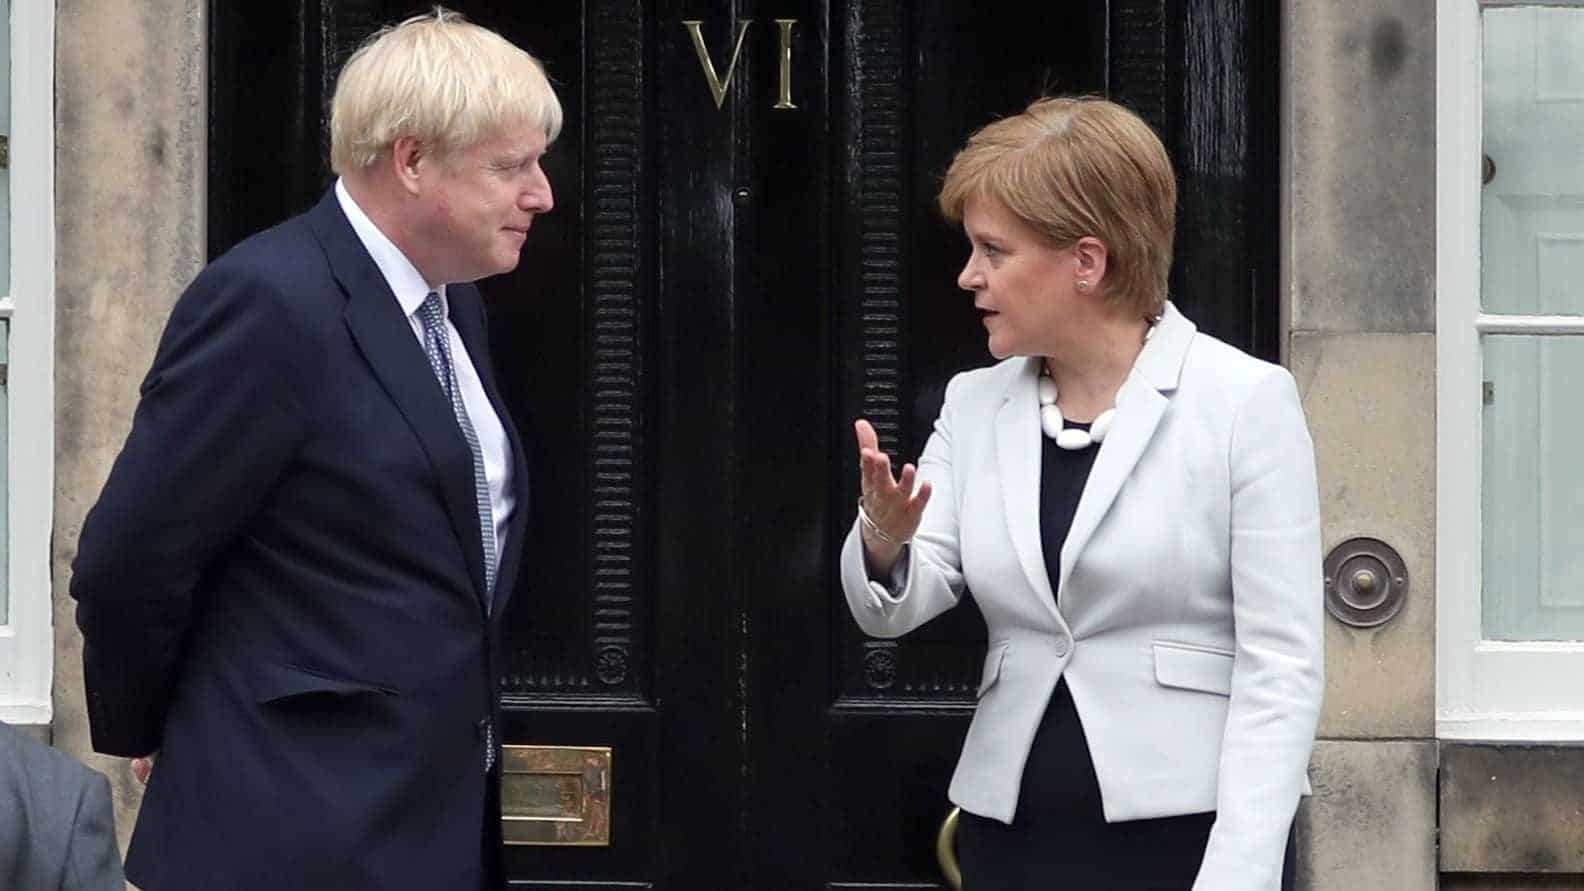 Boris’ Brexit deal has made the case for Scotland’s independence